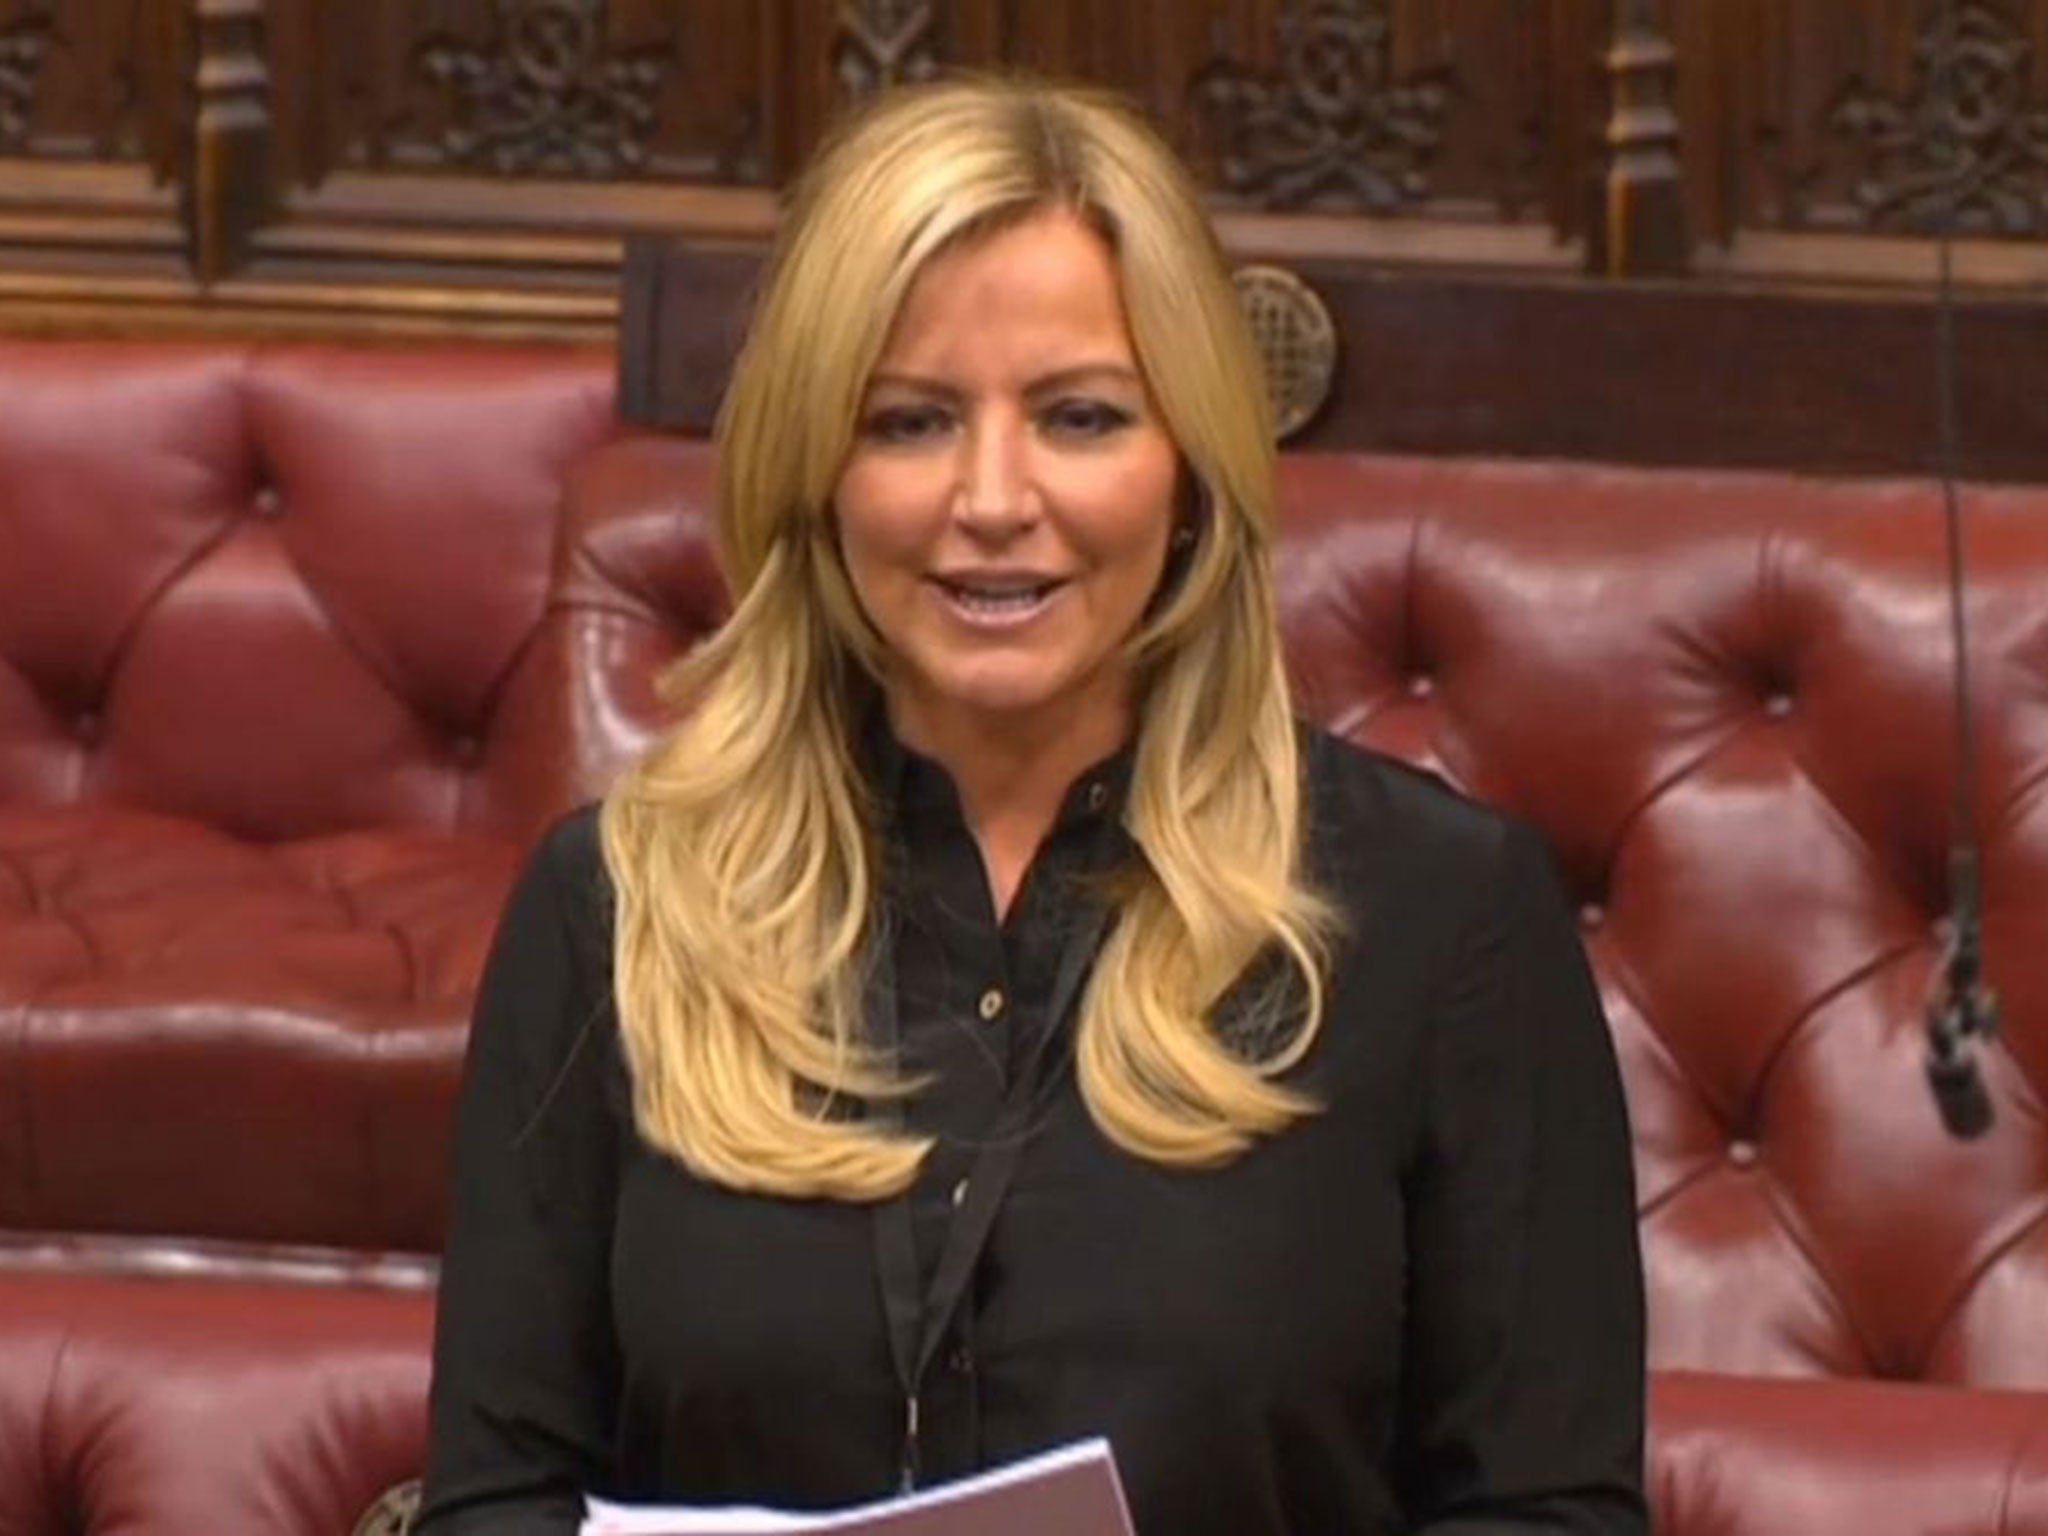 Baroness Mone has come under pressure since it was reported that she is a beneficiary of an offshore trust believed to have received £29m from PPE Medpro’s profits